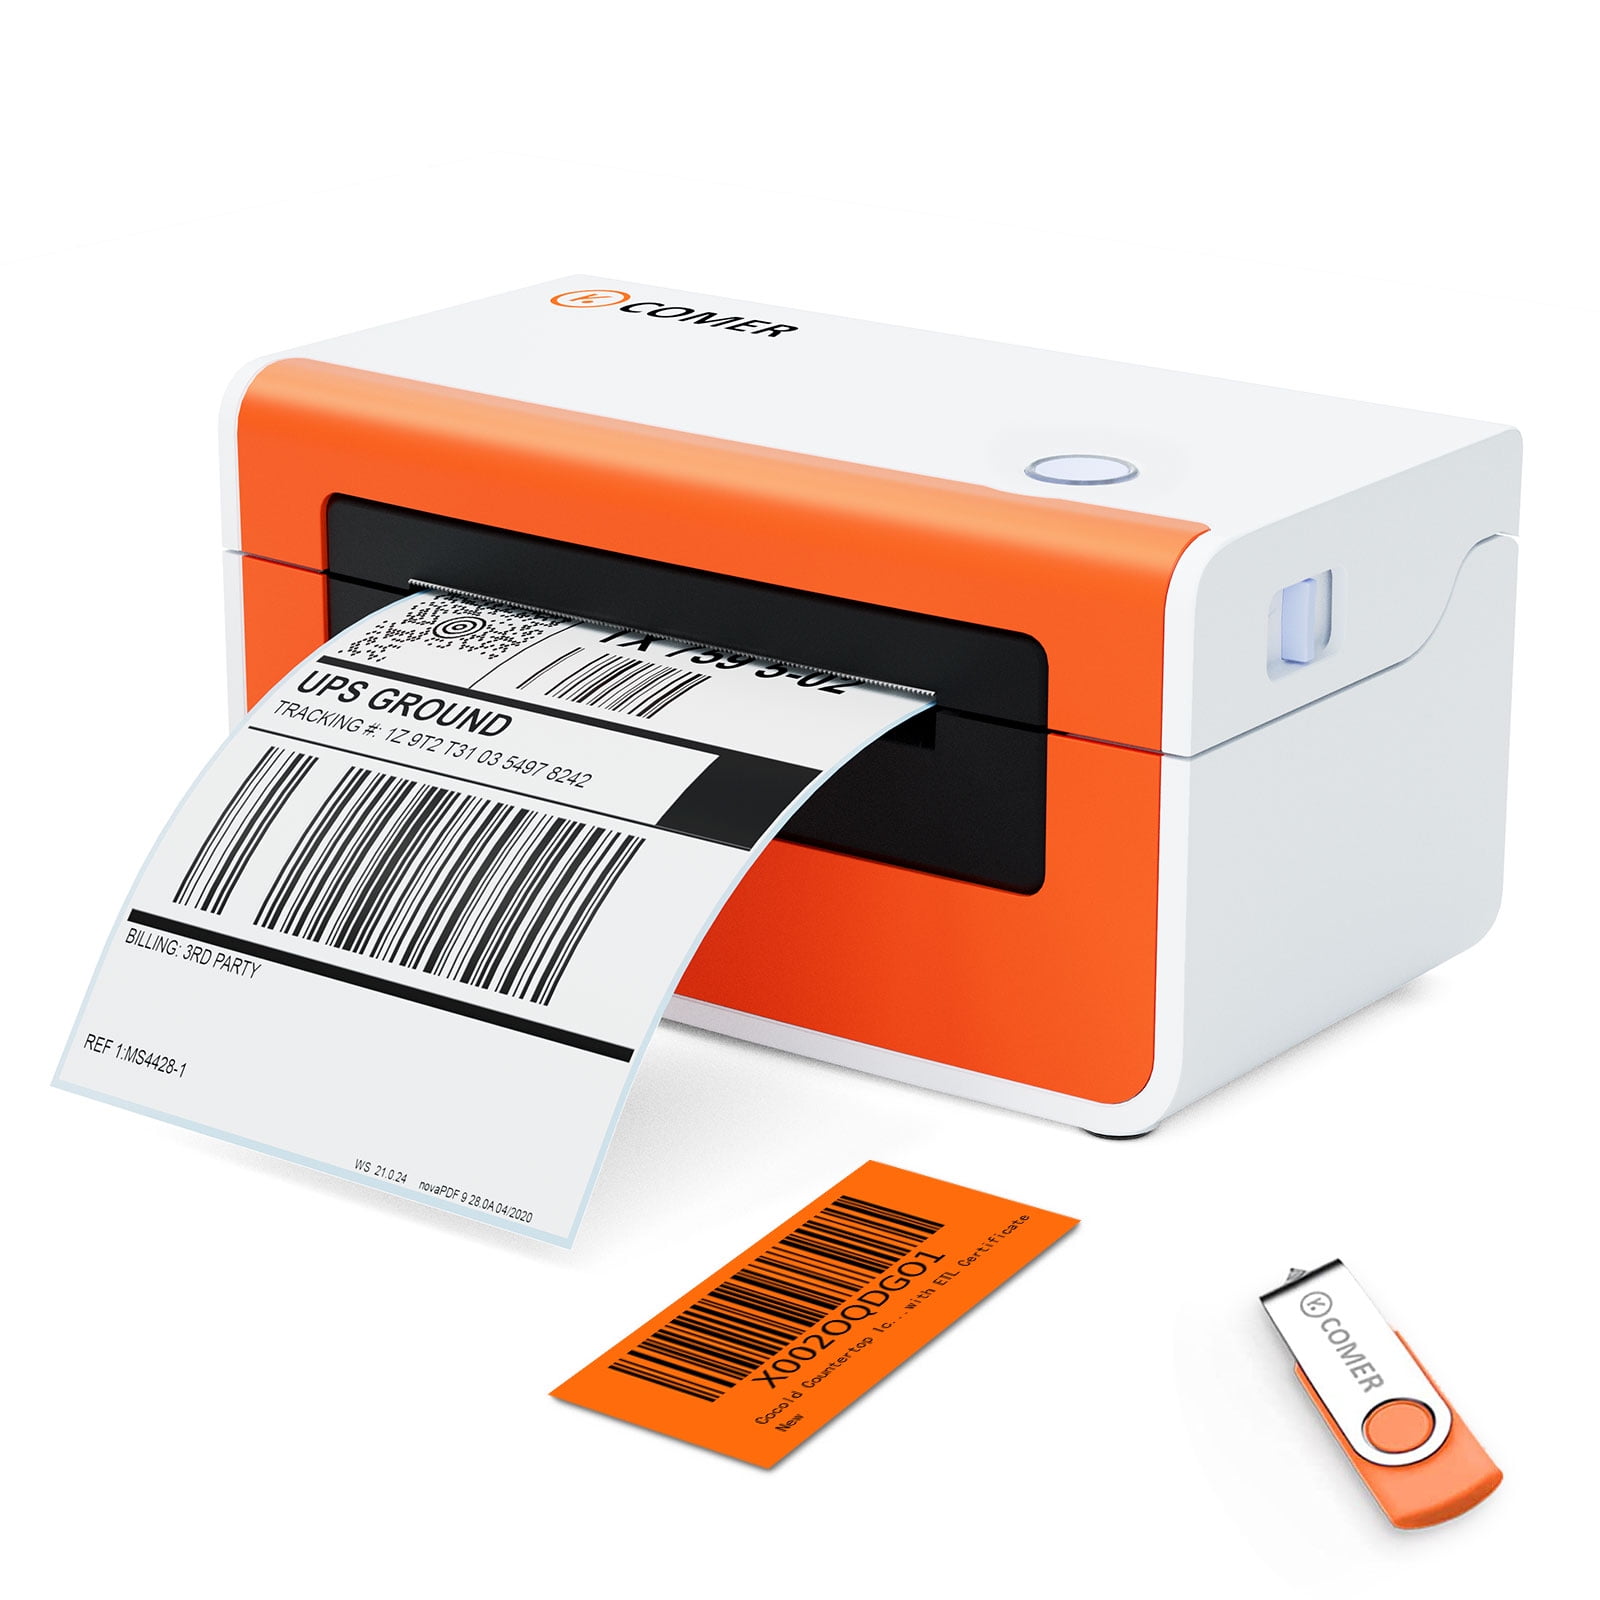 D520-bt Bluetooth Thermal Shipping Label Printer 4x6 - Imprimante